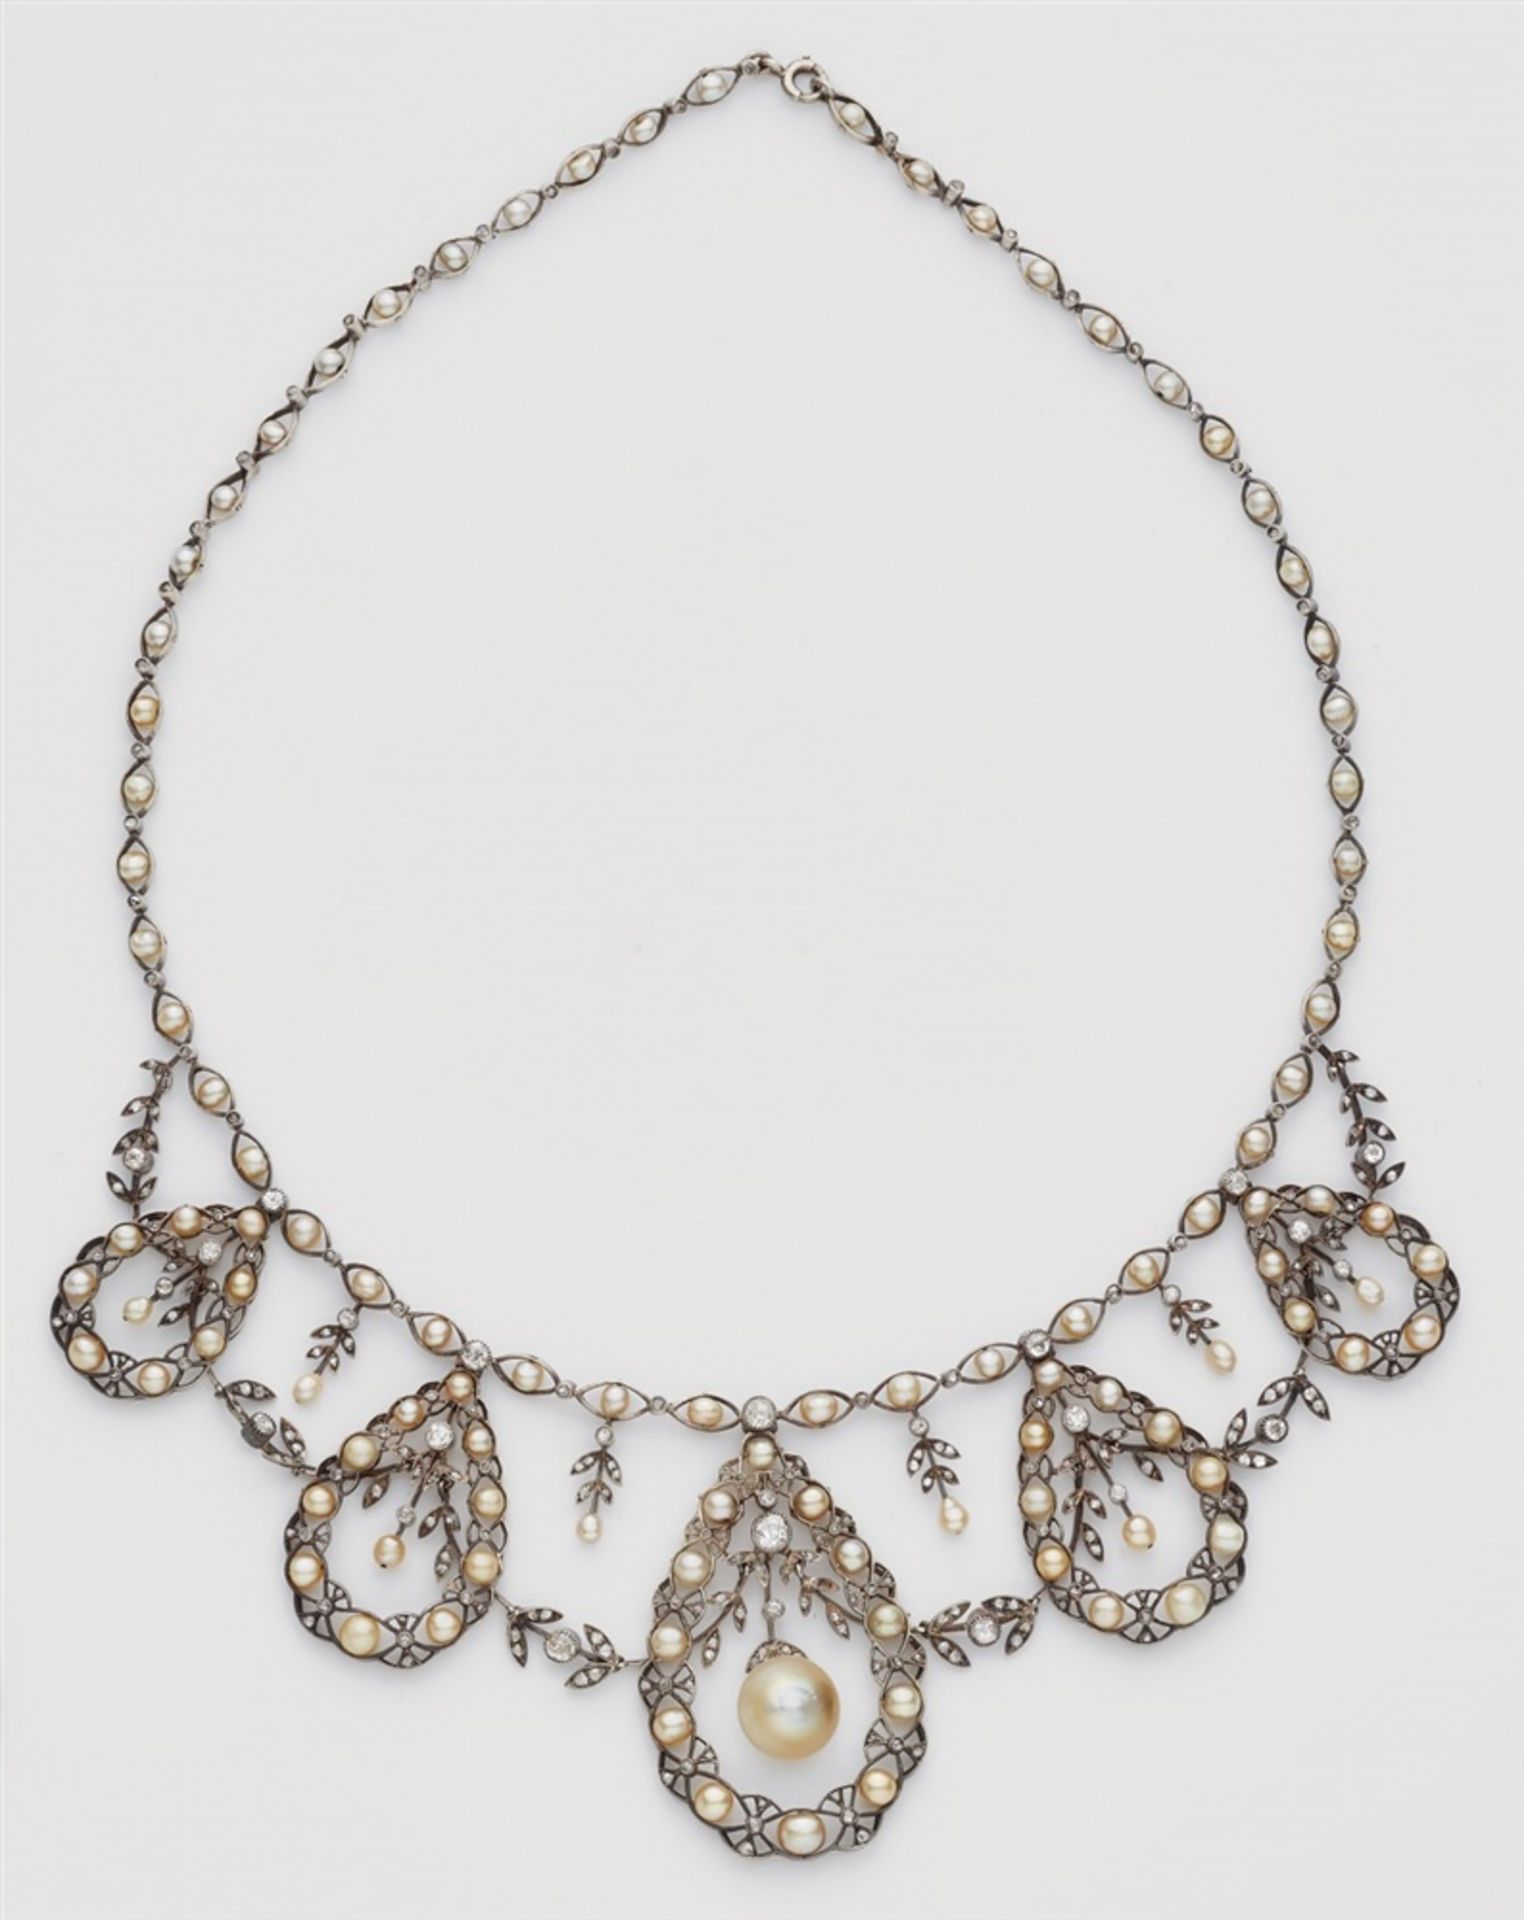 A Belle Epoque diamond and Oriental pearl necklacePlatinum necklace designed as a delicate garland